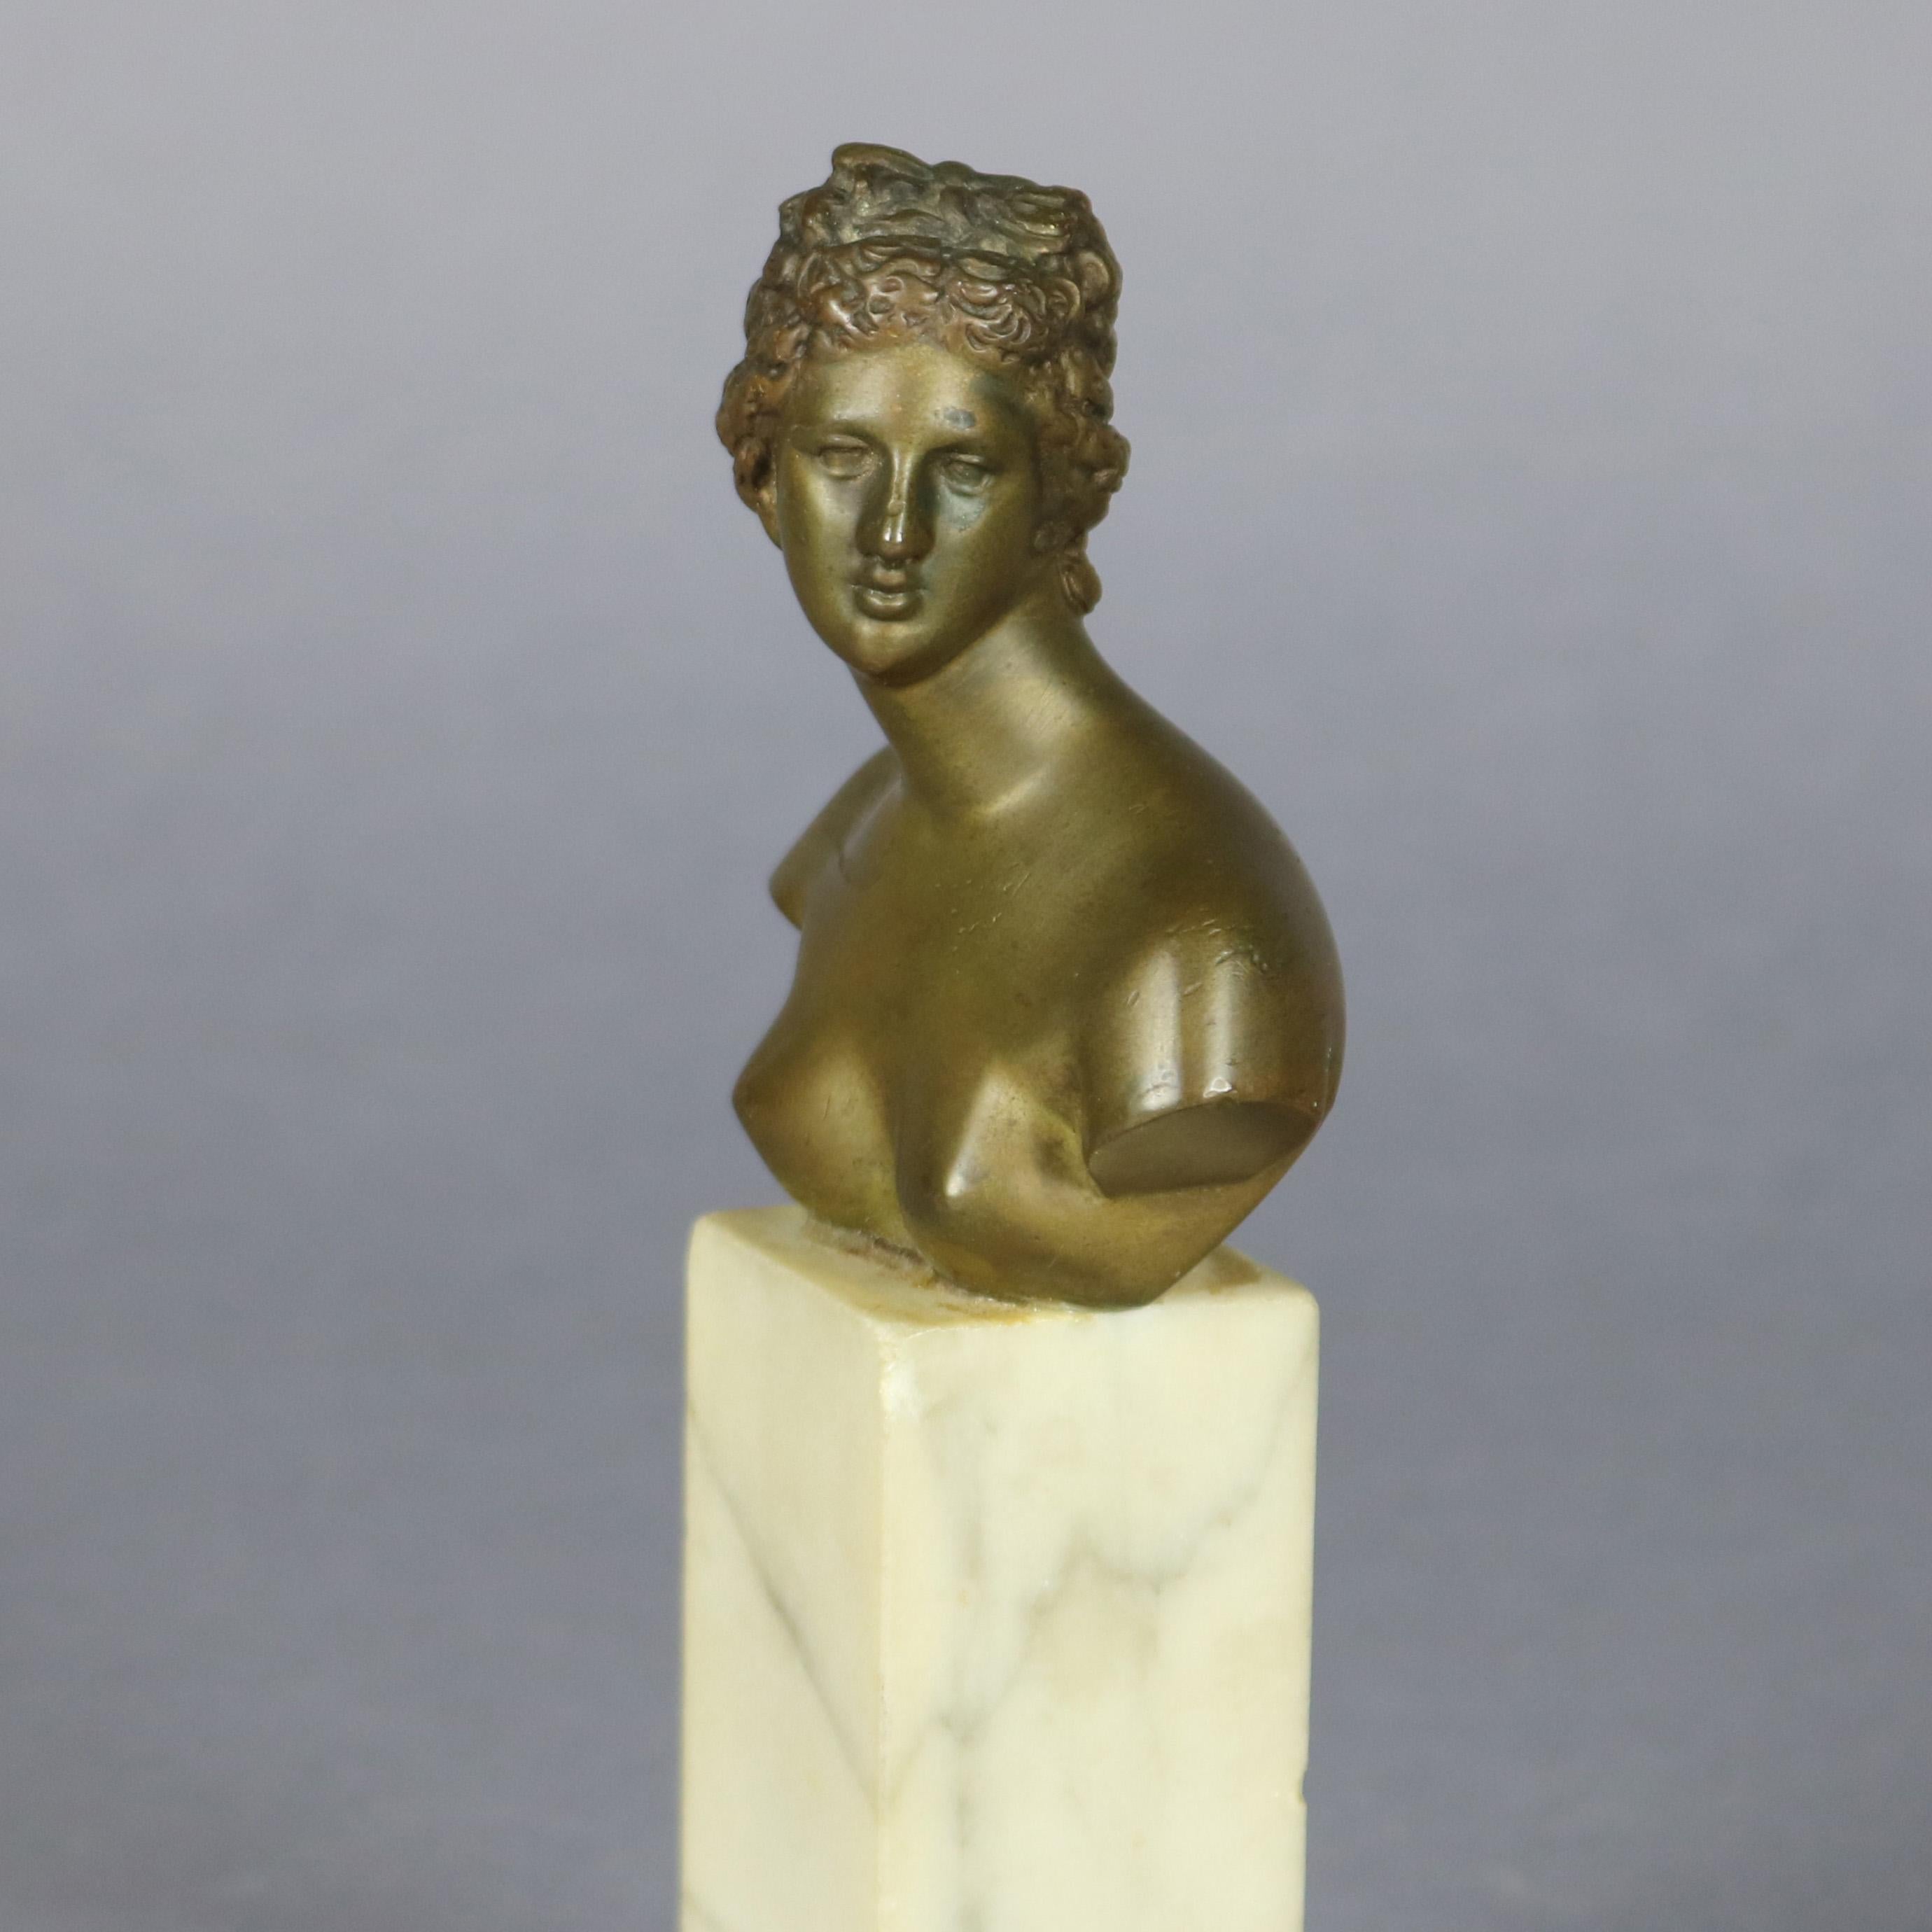 Antique neoclassical portrait sculpture of Greek Goddess Artemis features bronze bust raised on square marble plinth, circa 1890

***DELIVERY NOTICE – Due to COVID-19 we are employing NO-CONTACT PRACTICES in the transfer of purchased items. 